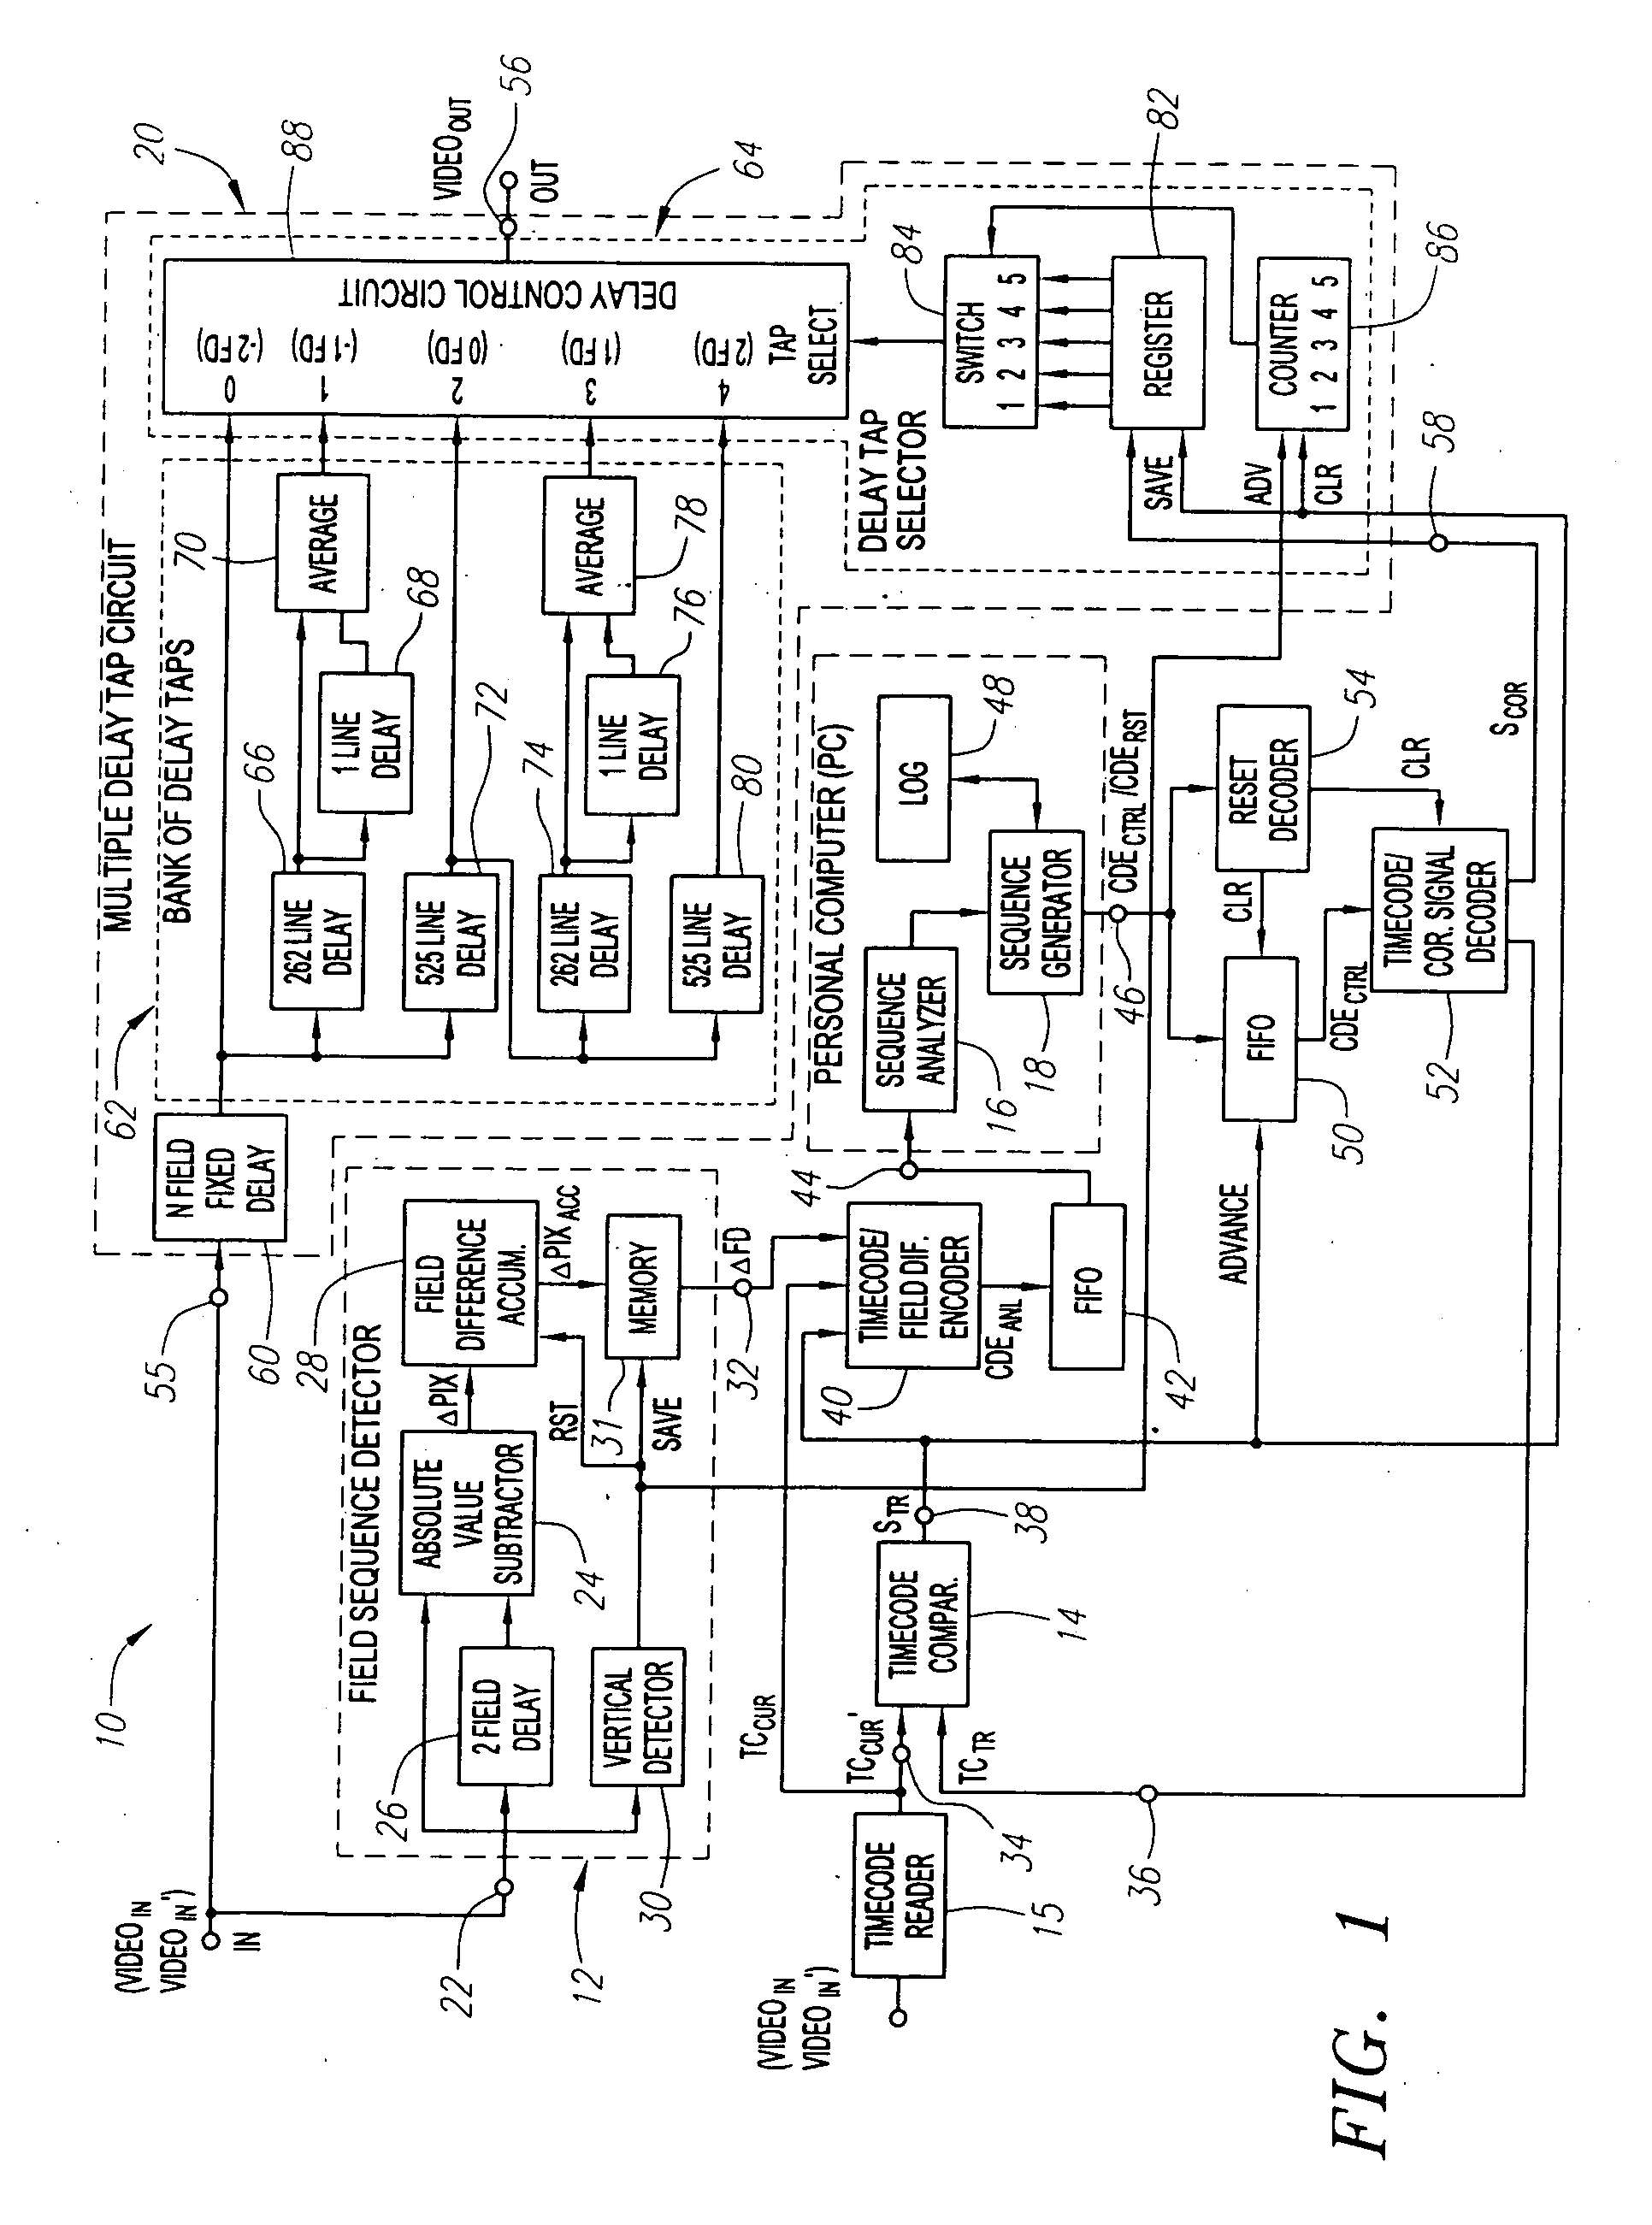 Methods and apparatus for correction of 2-3 field patterns